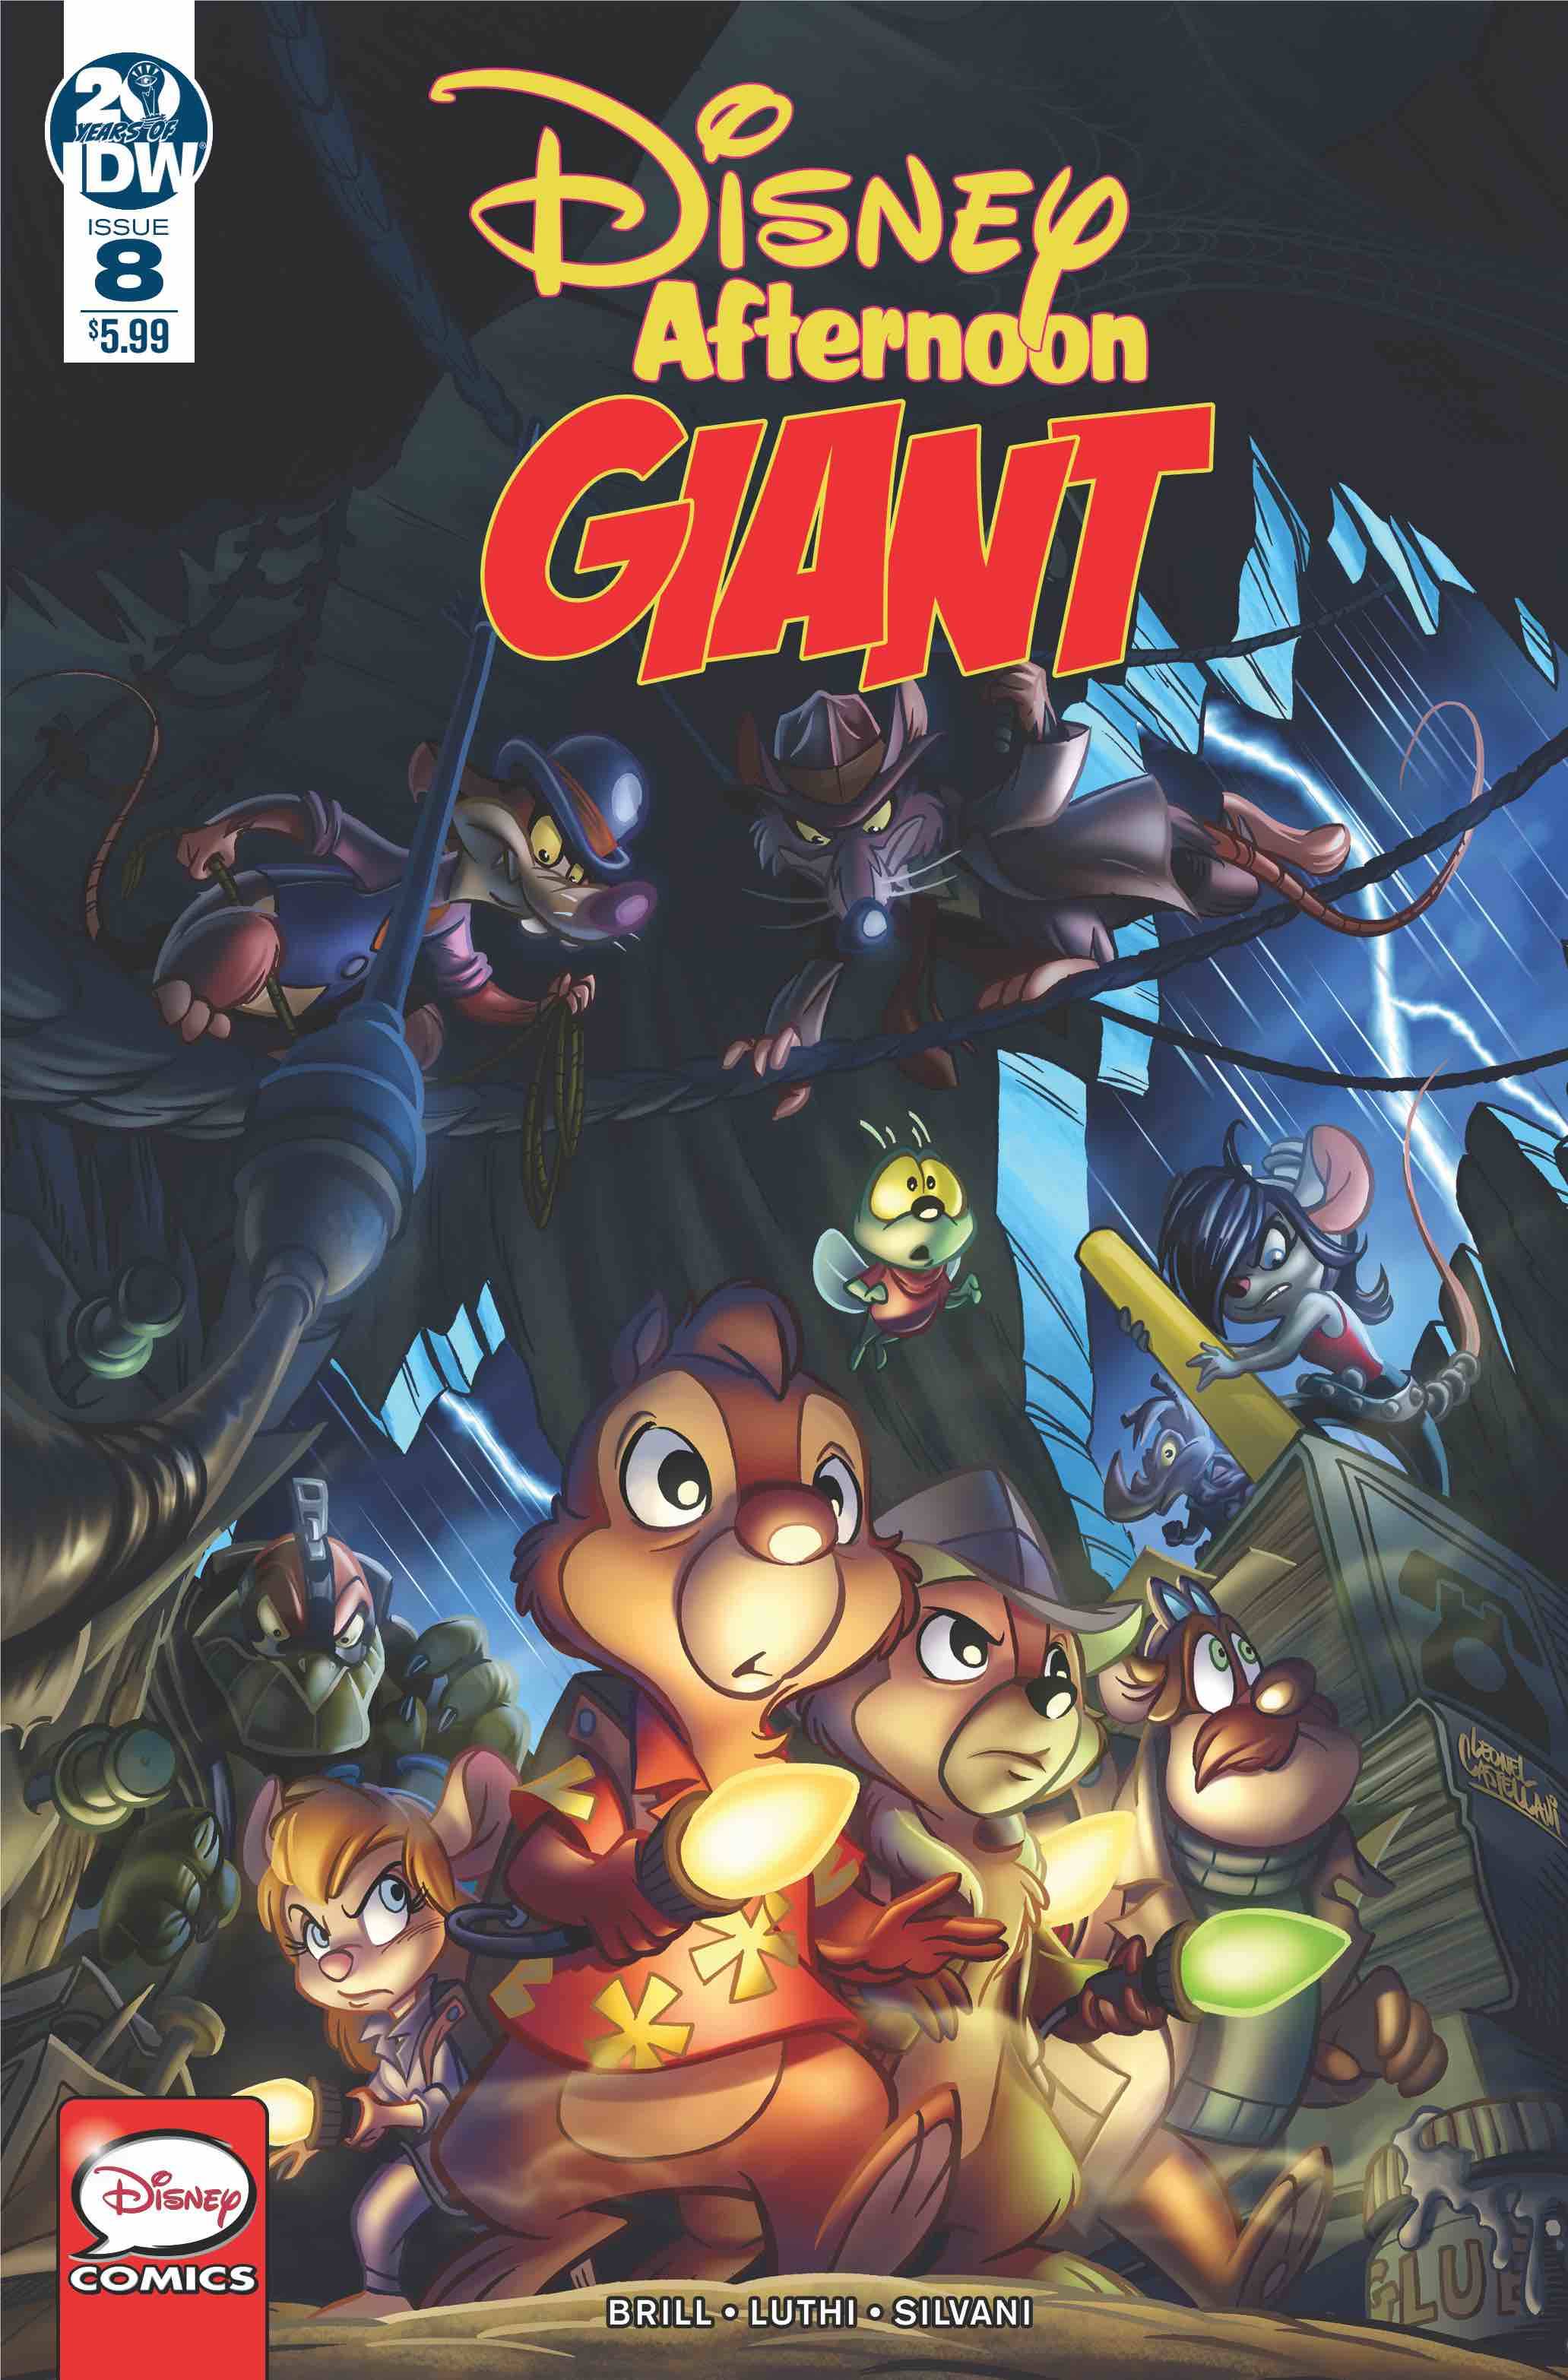 Disney Afternoon Giant #8 (2019)